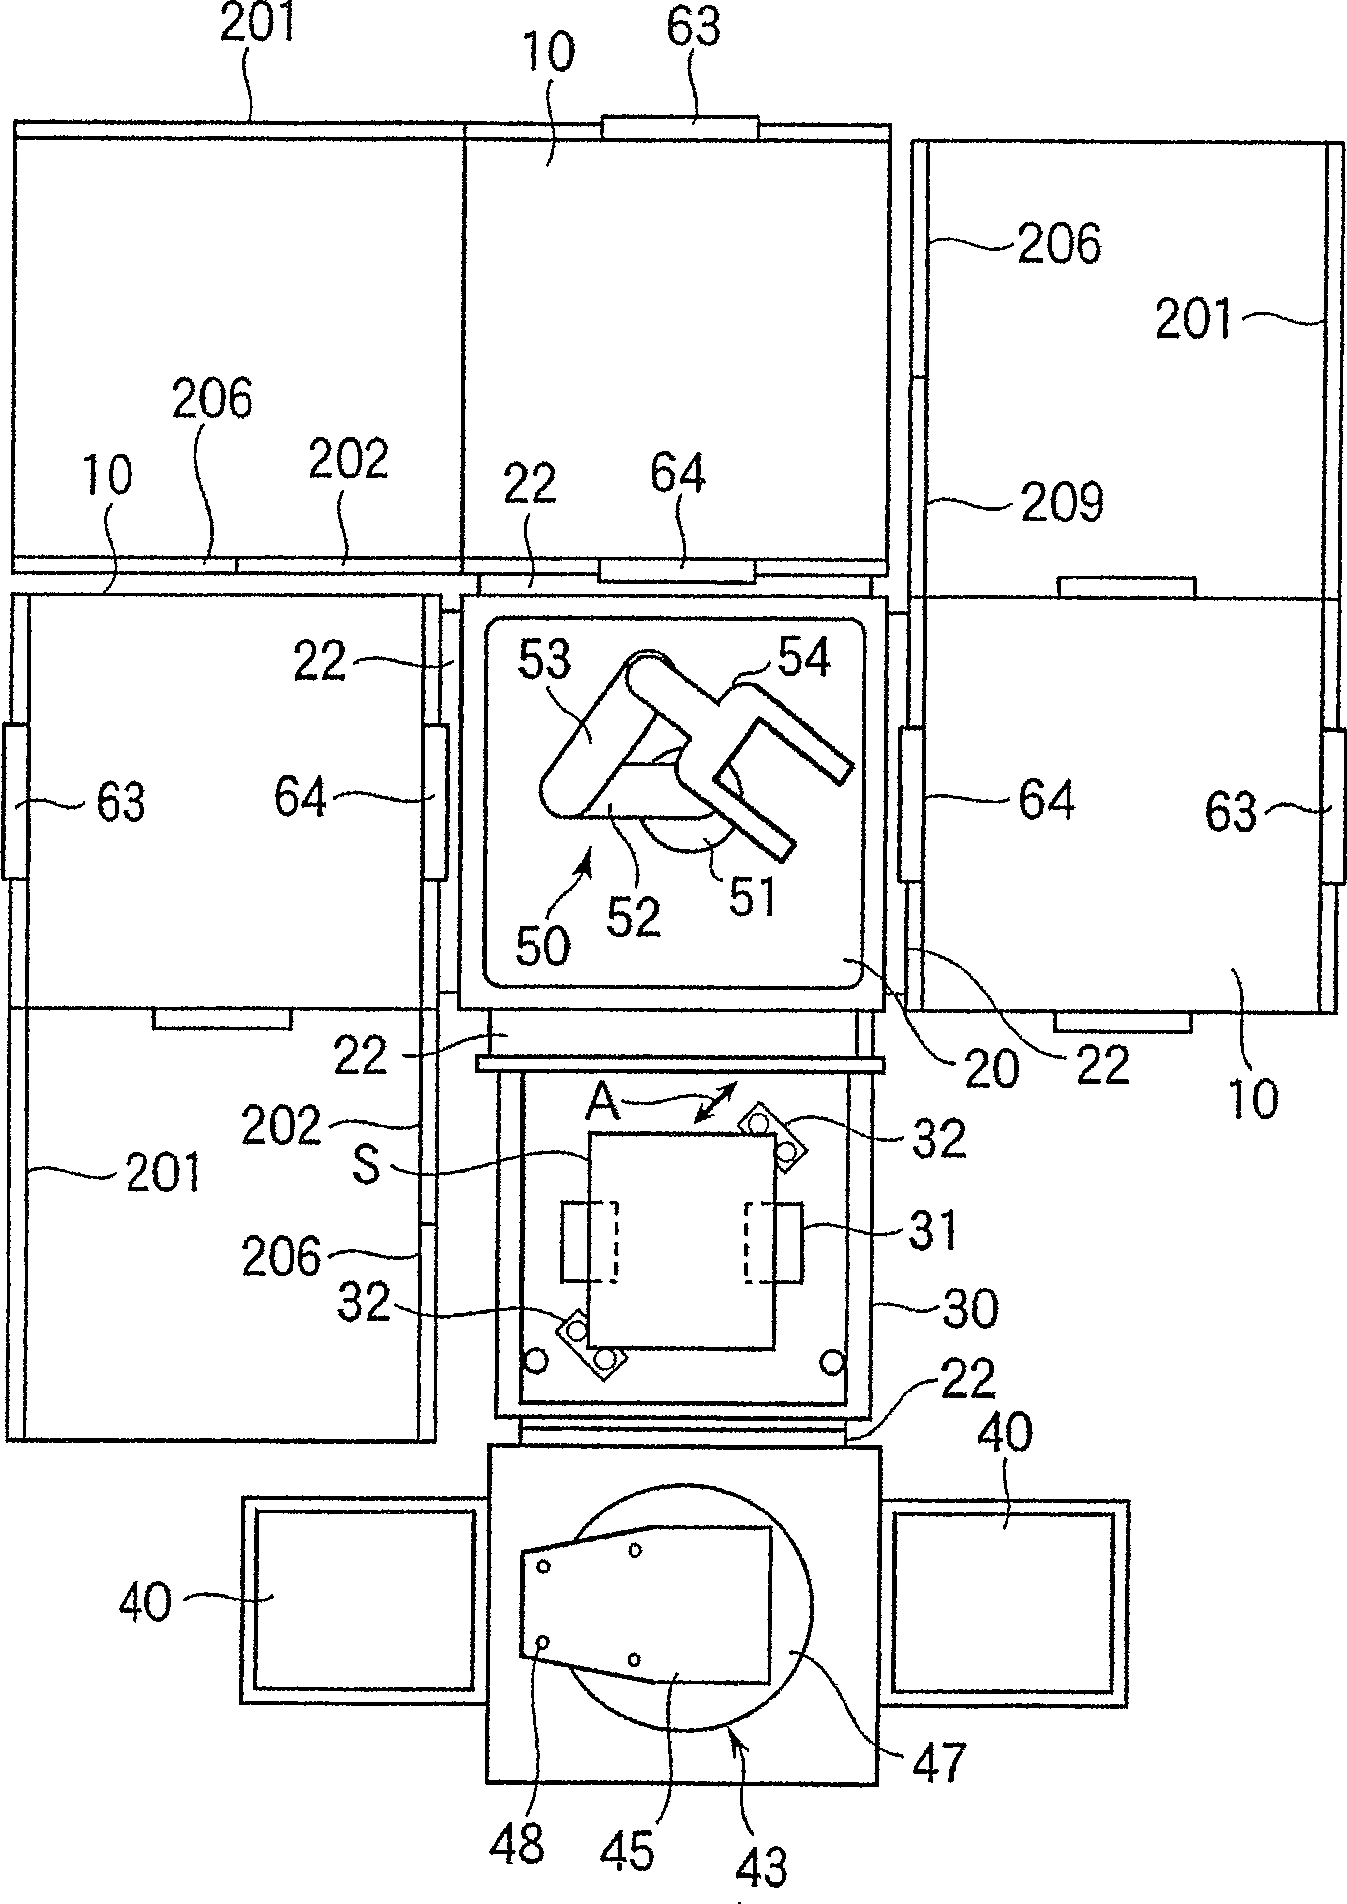 Substrate processing device and substrate processing system